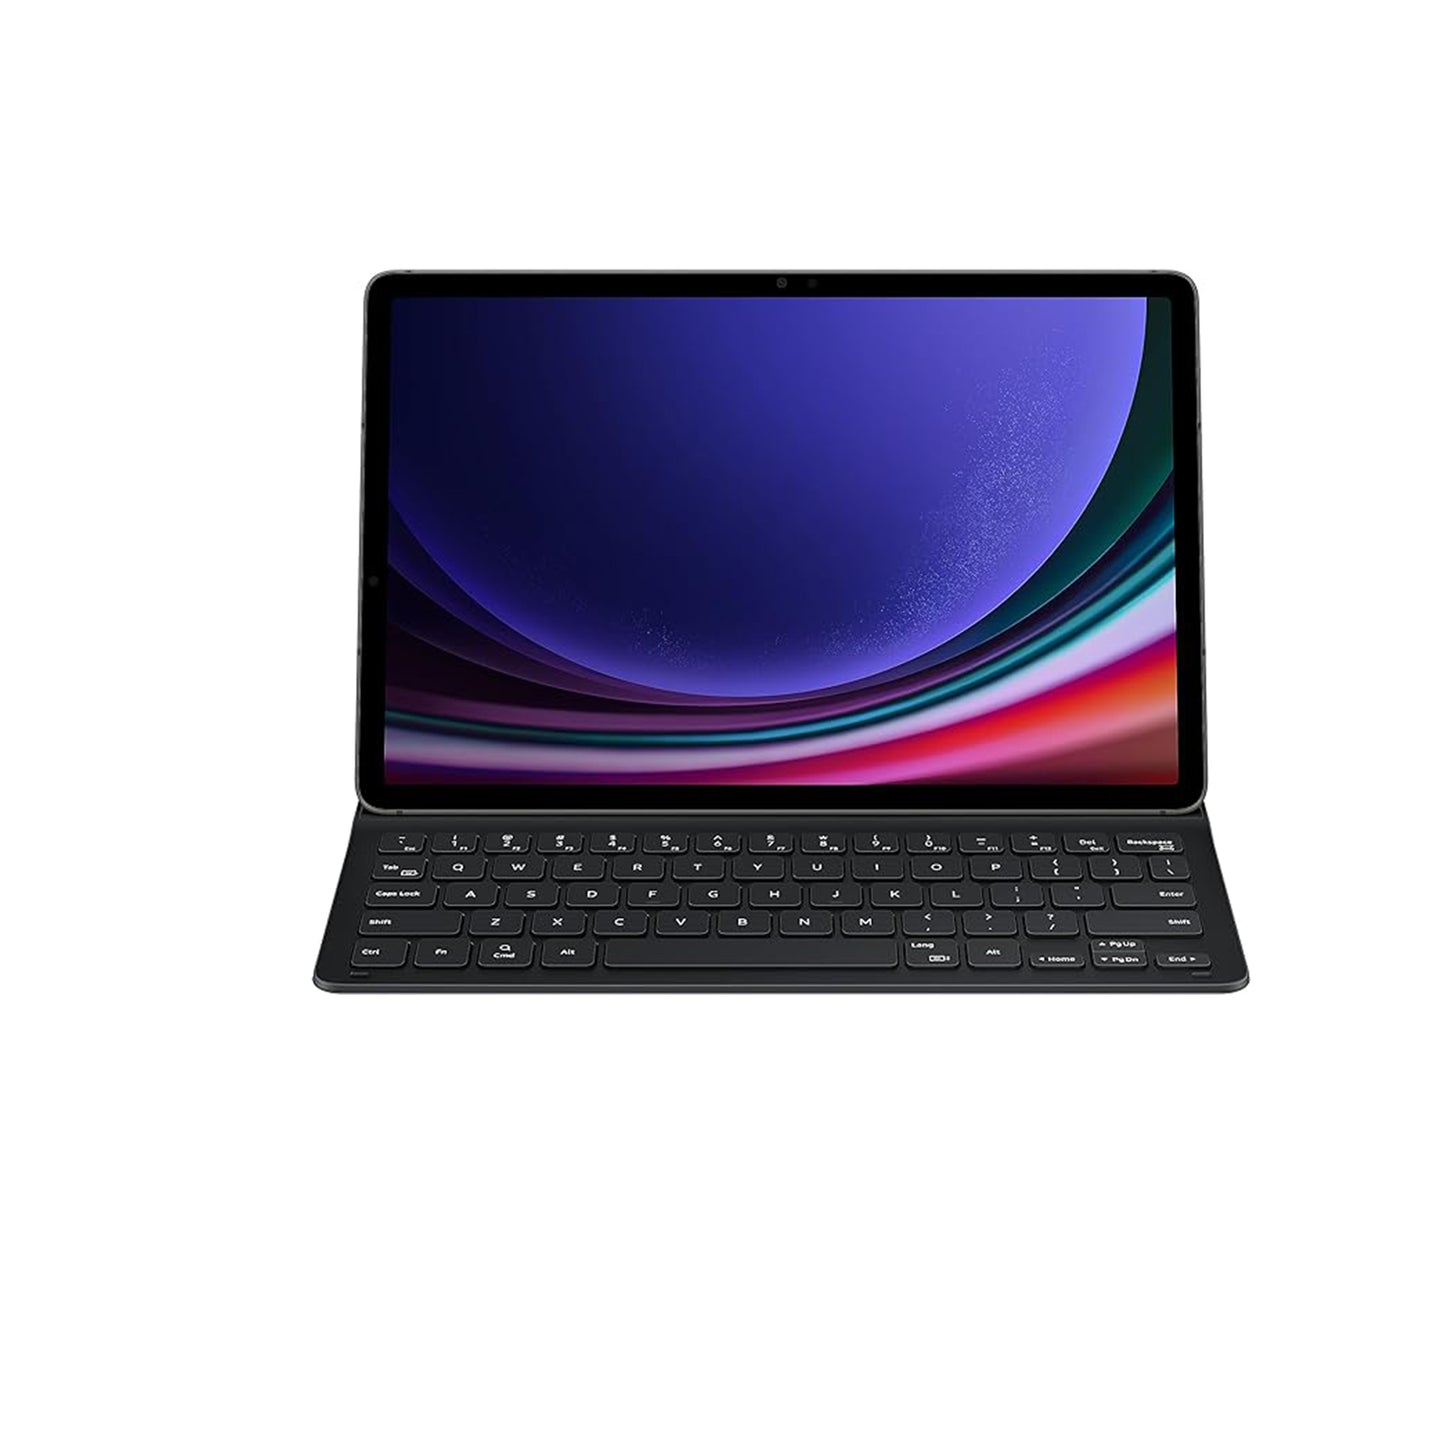 Samsung Galaxy Tab S9 FE Book Cover Keyboard Slim, Tablet Protector Case, Thin and Lightweight Design, Magnetic Back, PC-Like Experience, Wireless Keyboard Sharing, US Version, Black